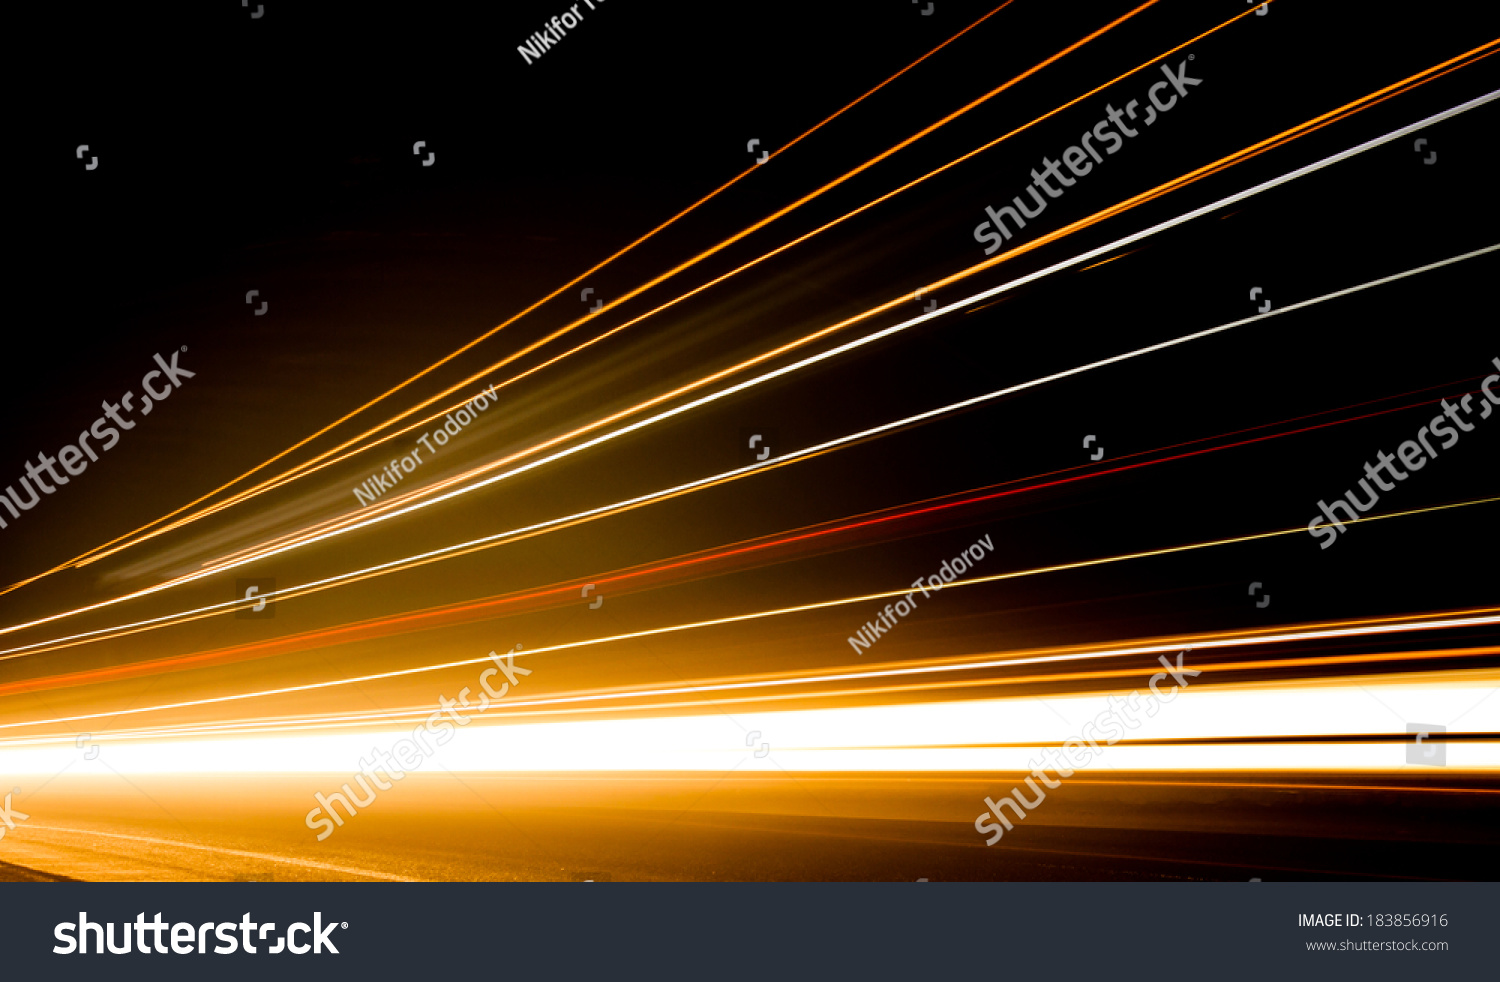 Truck light trails in tunnel. Art image . Long exposure photo taken in a tunnel  #183856916